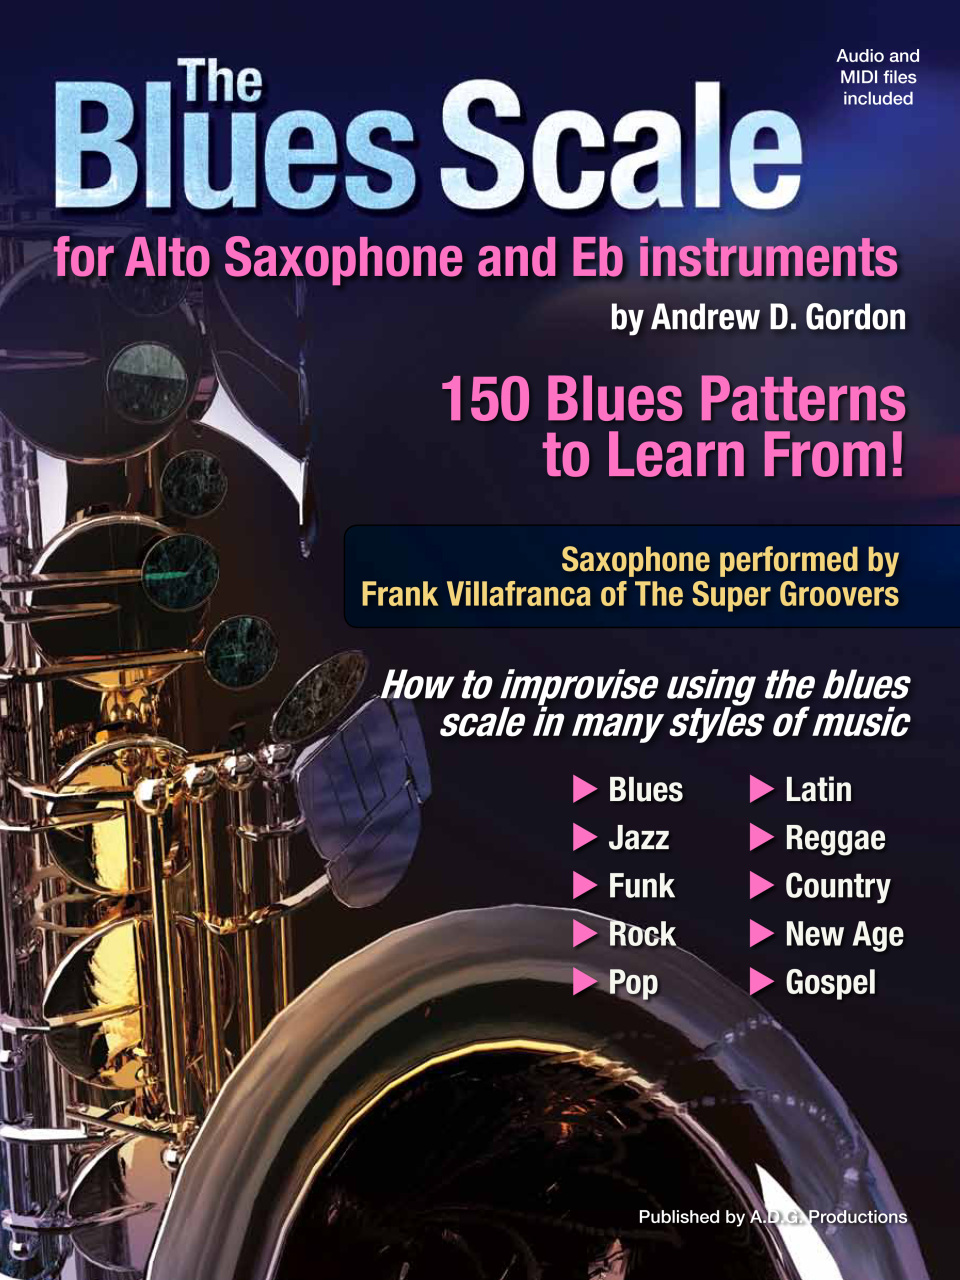 The Blues Scale for Alto Sax and Eb instruments - DIGITAL SHEET MUSIC  DOWNLOADS